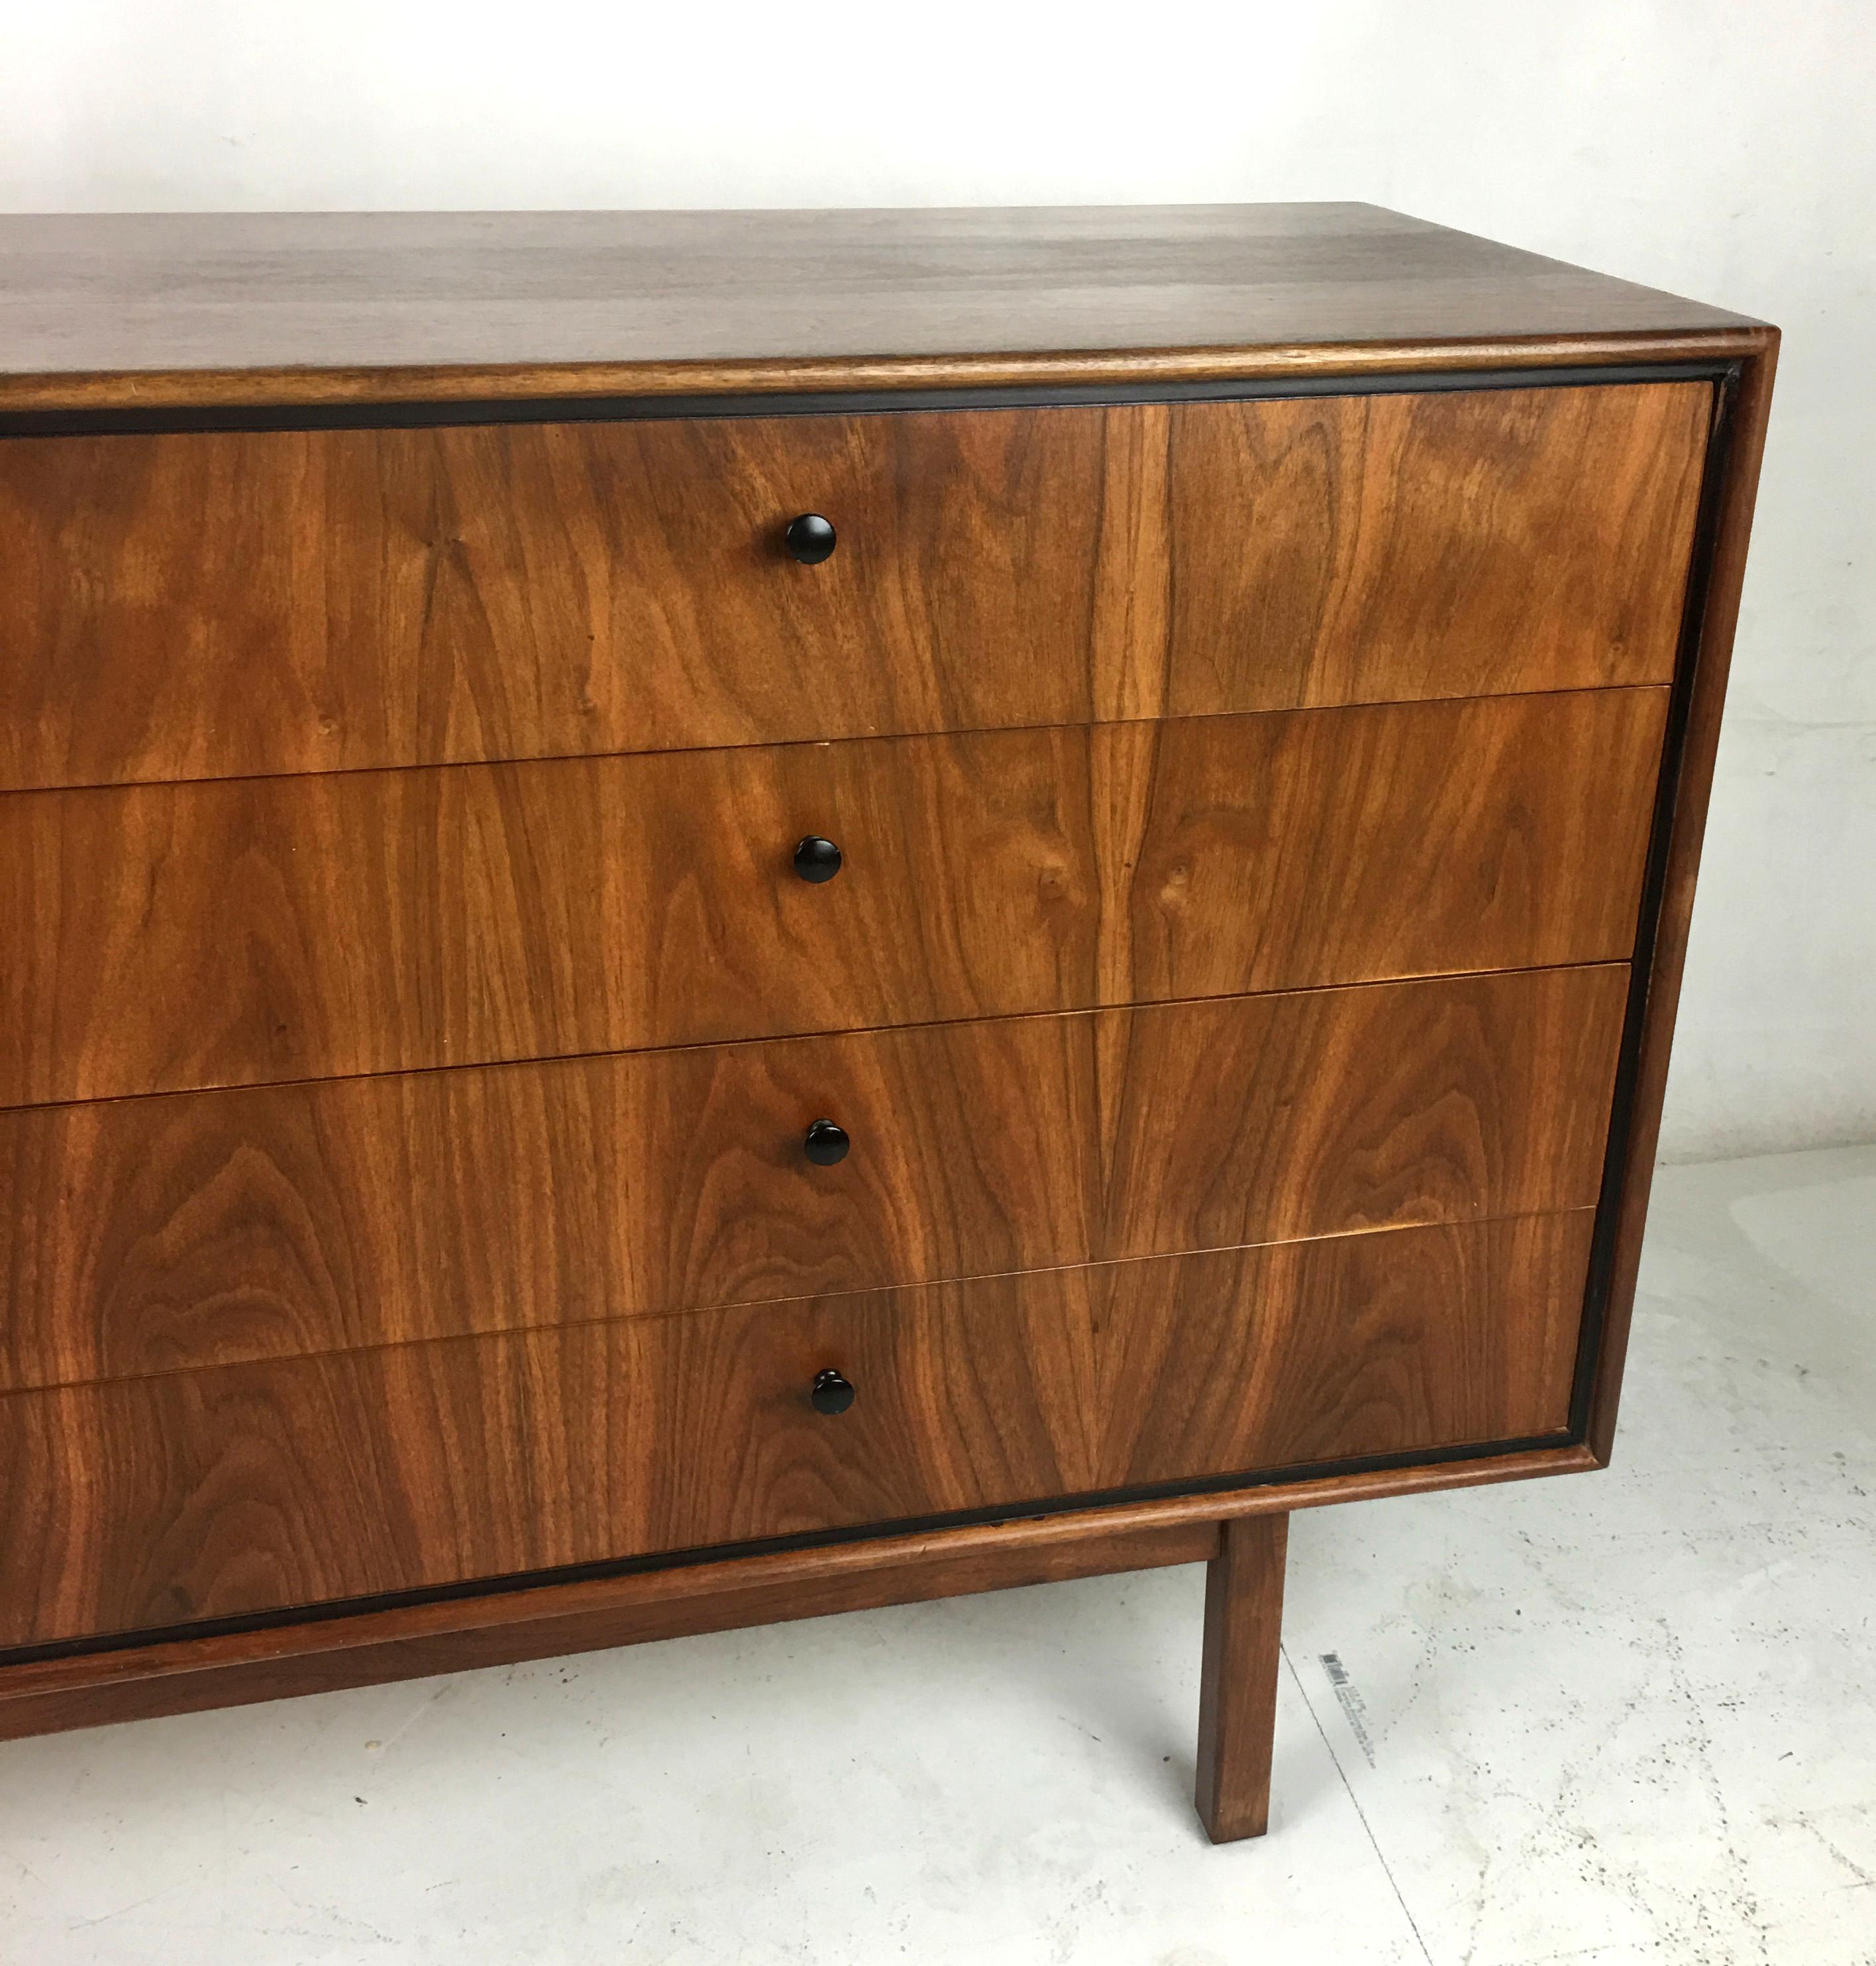 American Exquisite Walnut Dresser by Jack Cartwright for Founders